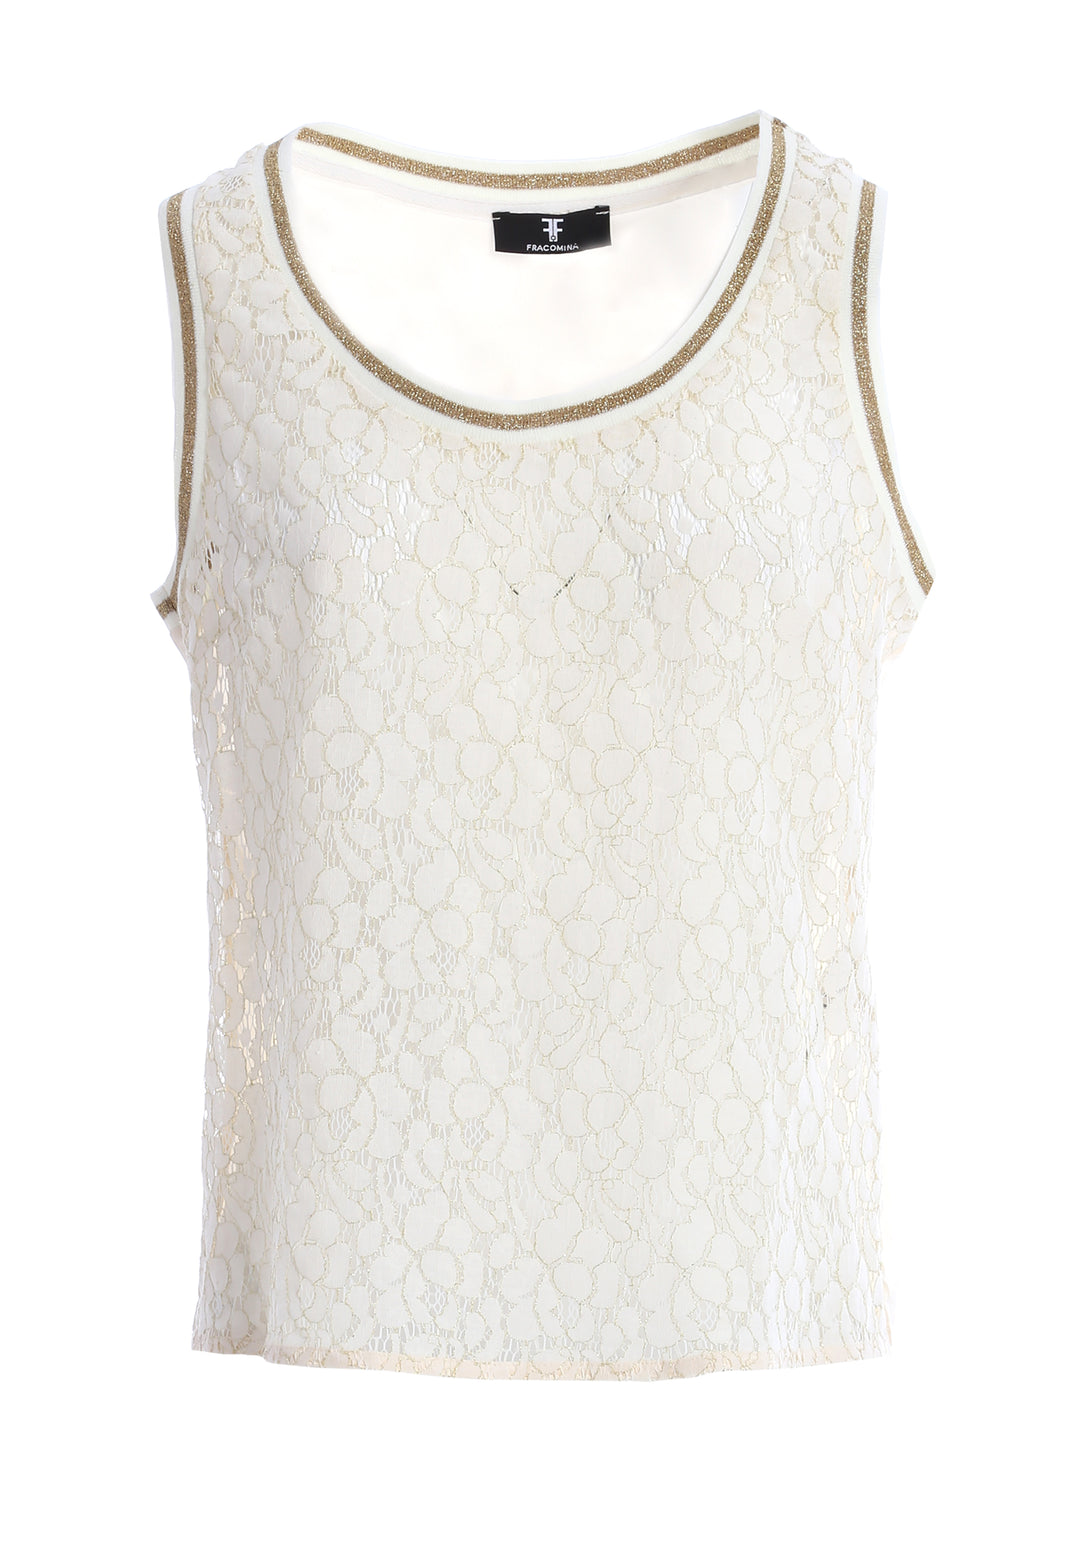 Tank top with front part made in lace